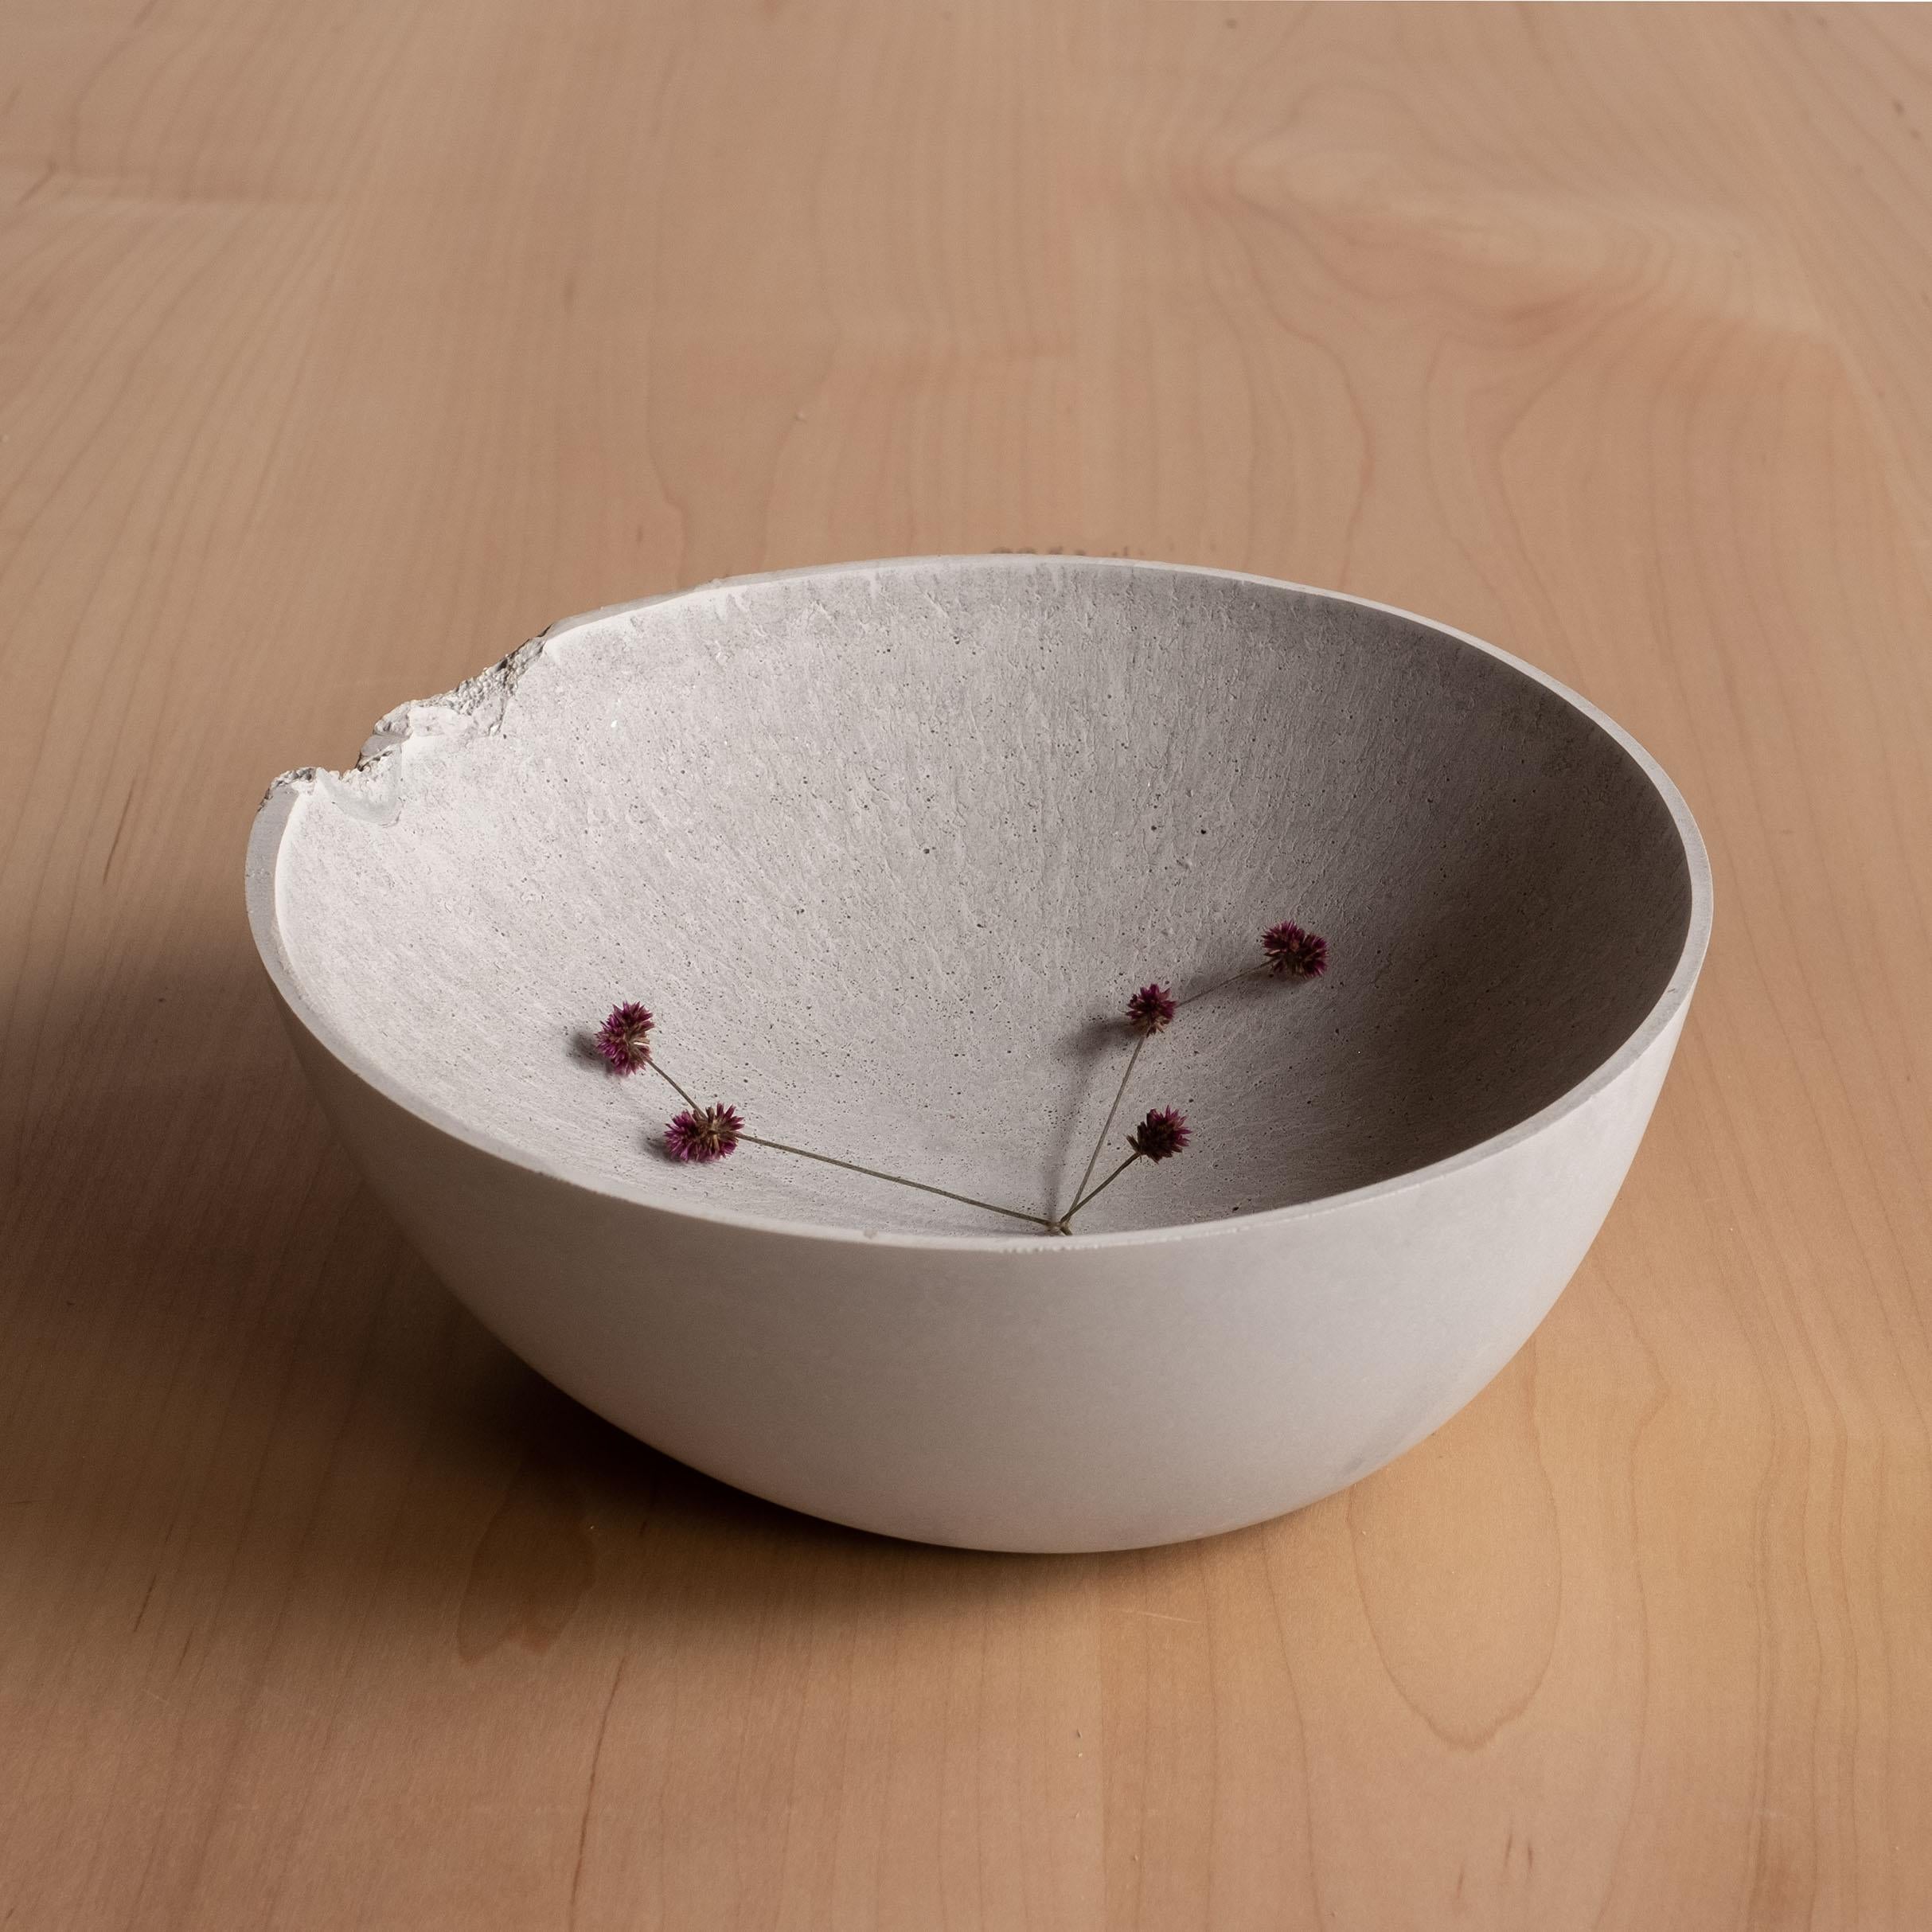 An edition of 150 unique bowls, the Concrete Series by UMÉ Studio expresses the tension between heavy concrete and its delicate edge generated by hand pouring. While one assumes concrete should be strong and durable, it is, at its core, fragile.